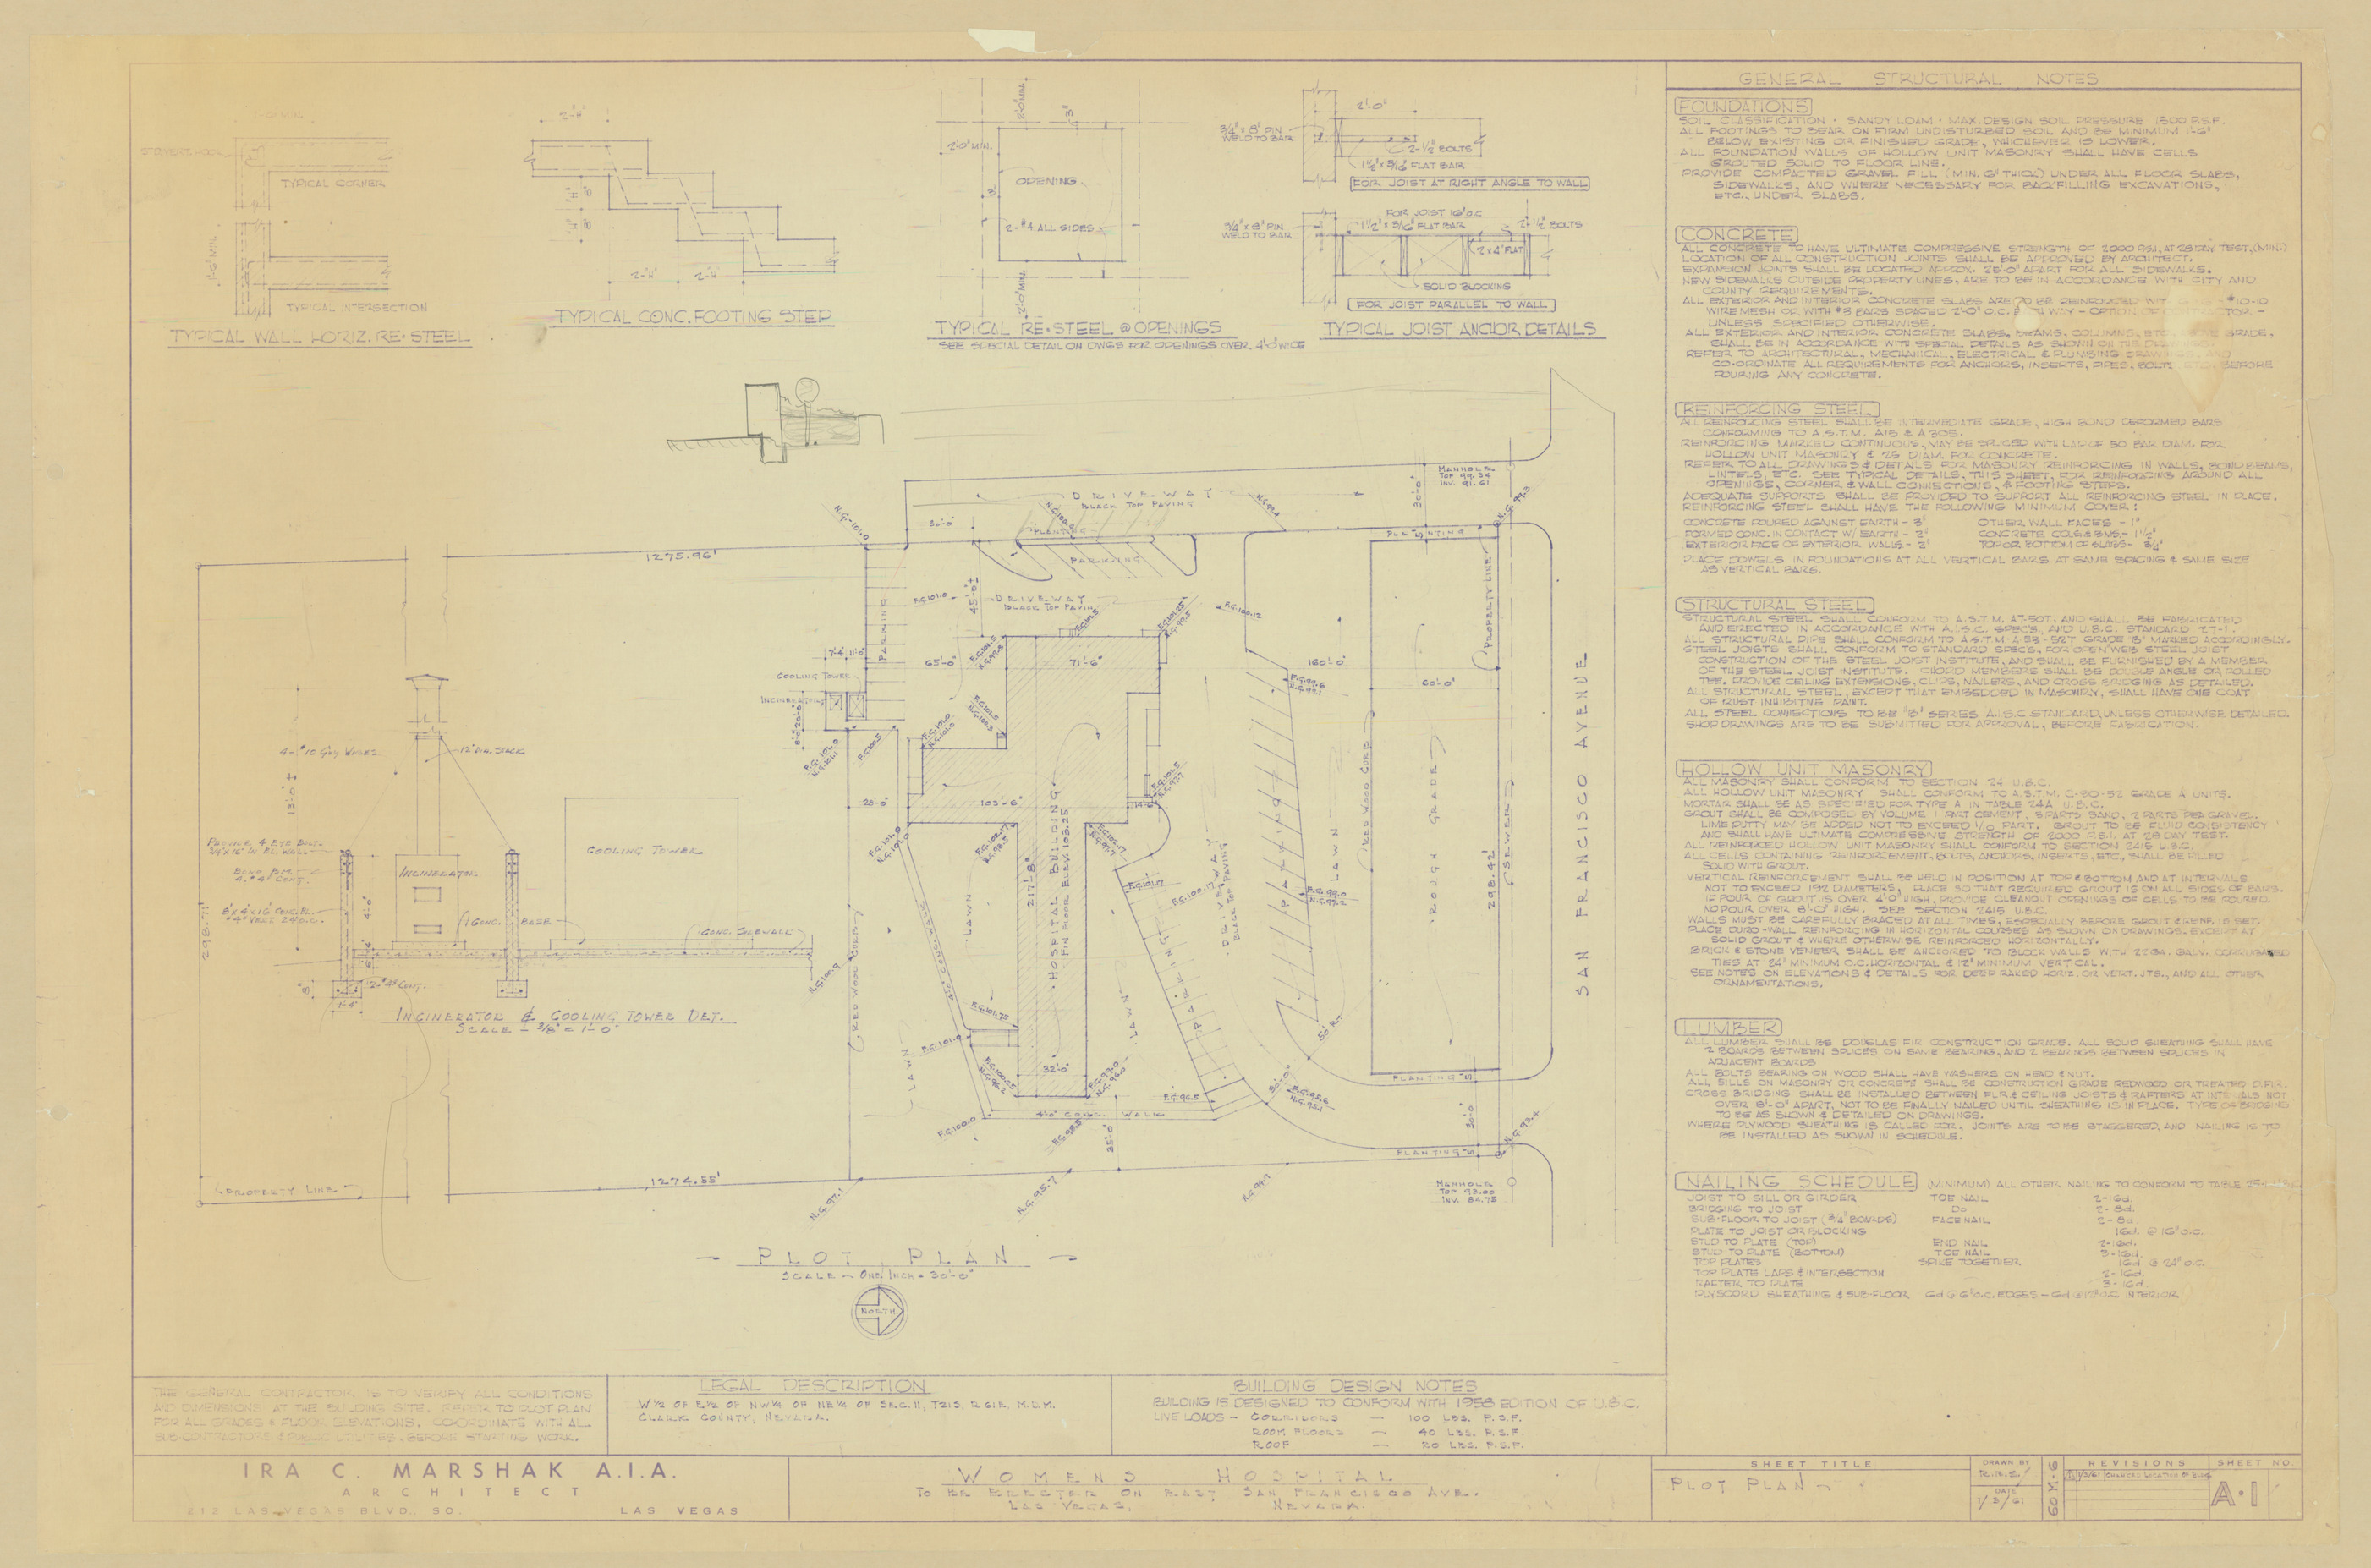 Women's Hospital: architectural, mechanical, electrical, plumbing drawings, image 001